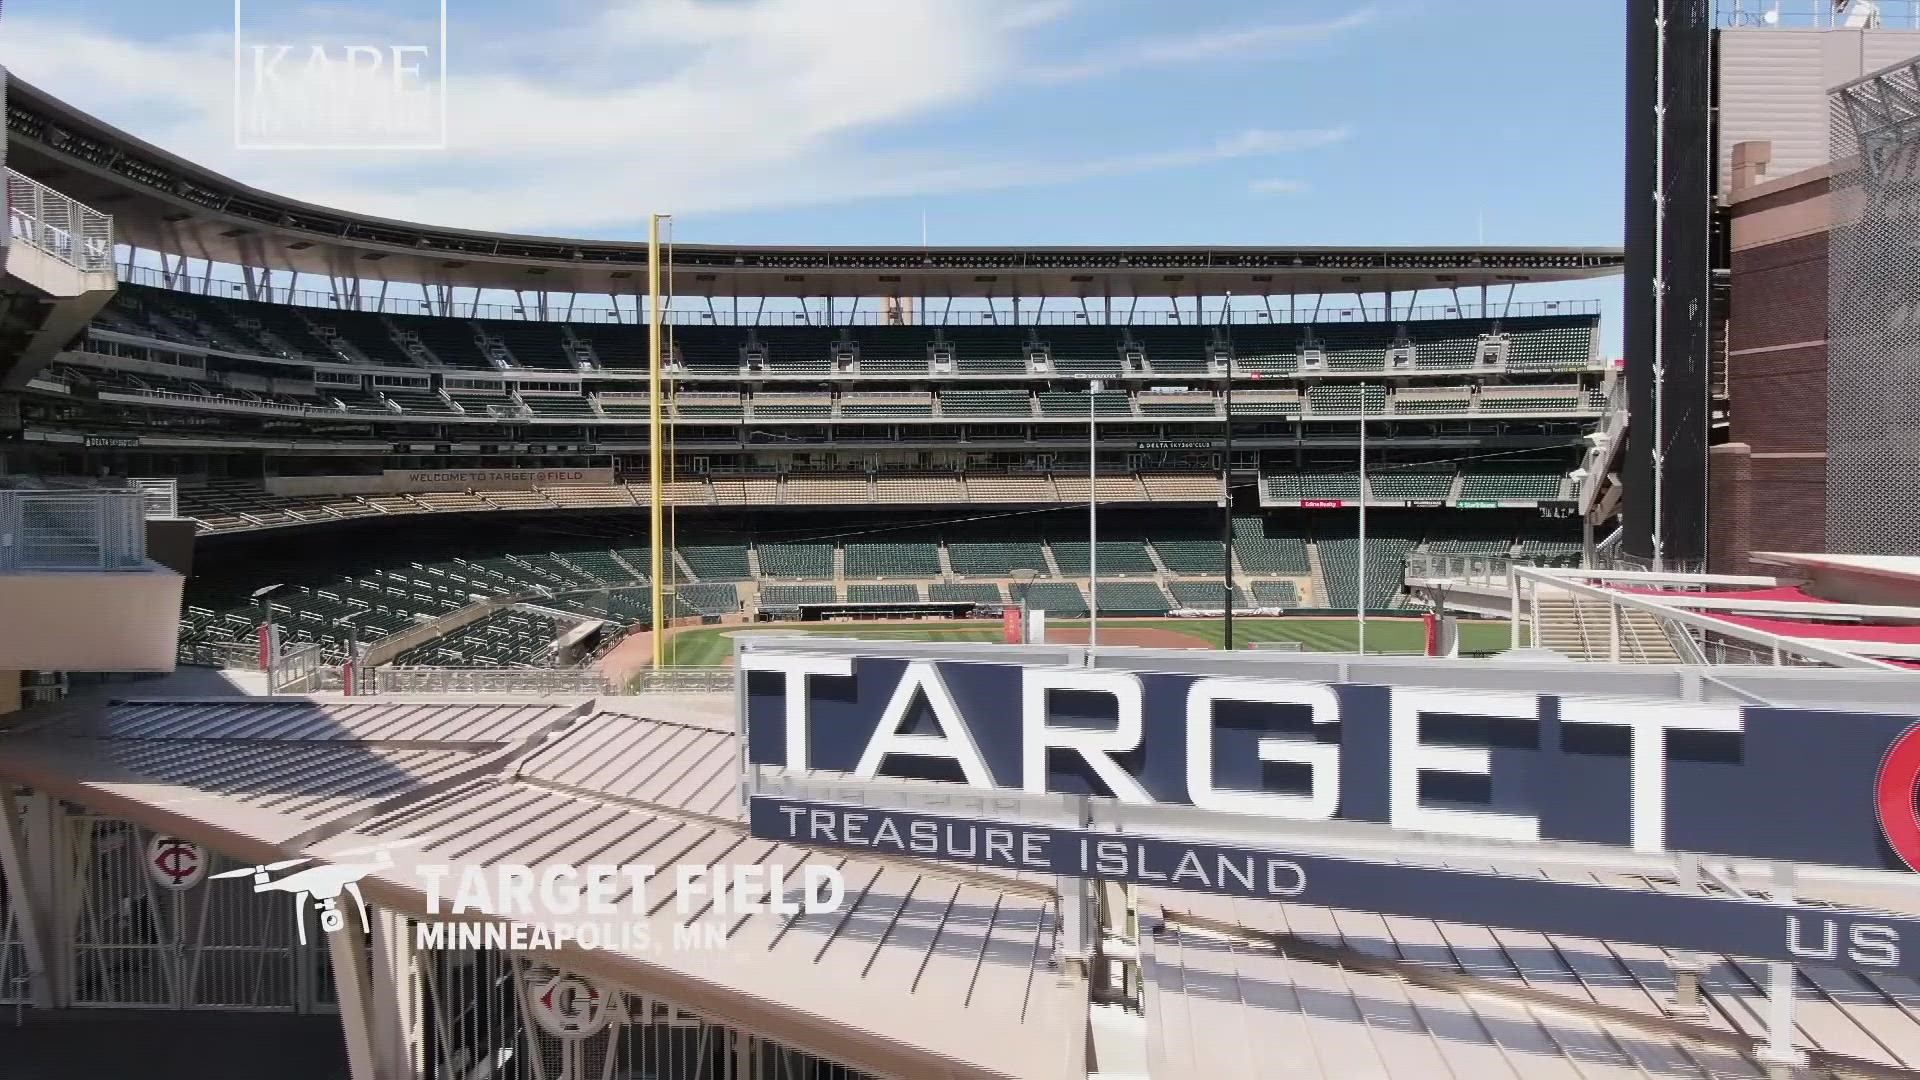 Our summer drone series takes you above Target Field, one of the coziest and most unique ballparks in Major League Baseball.